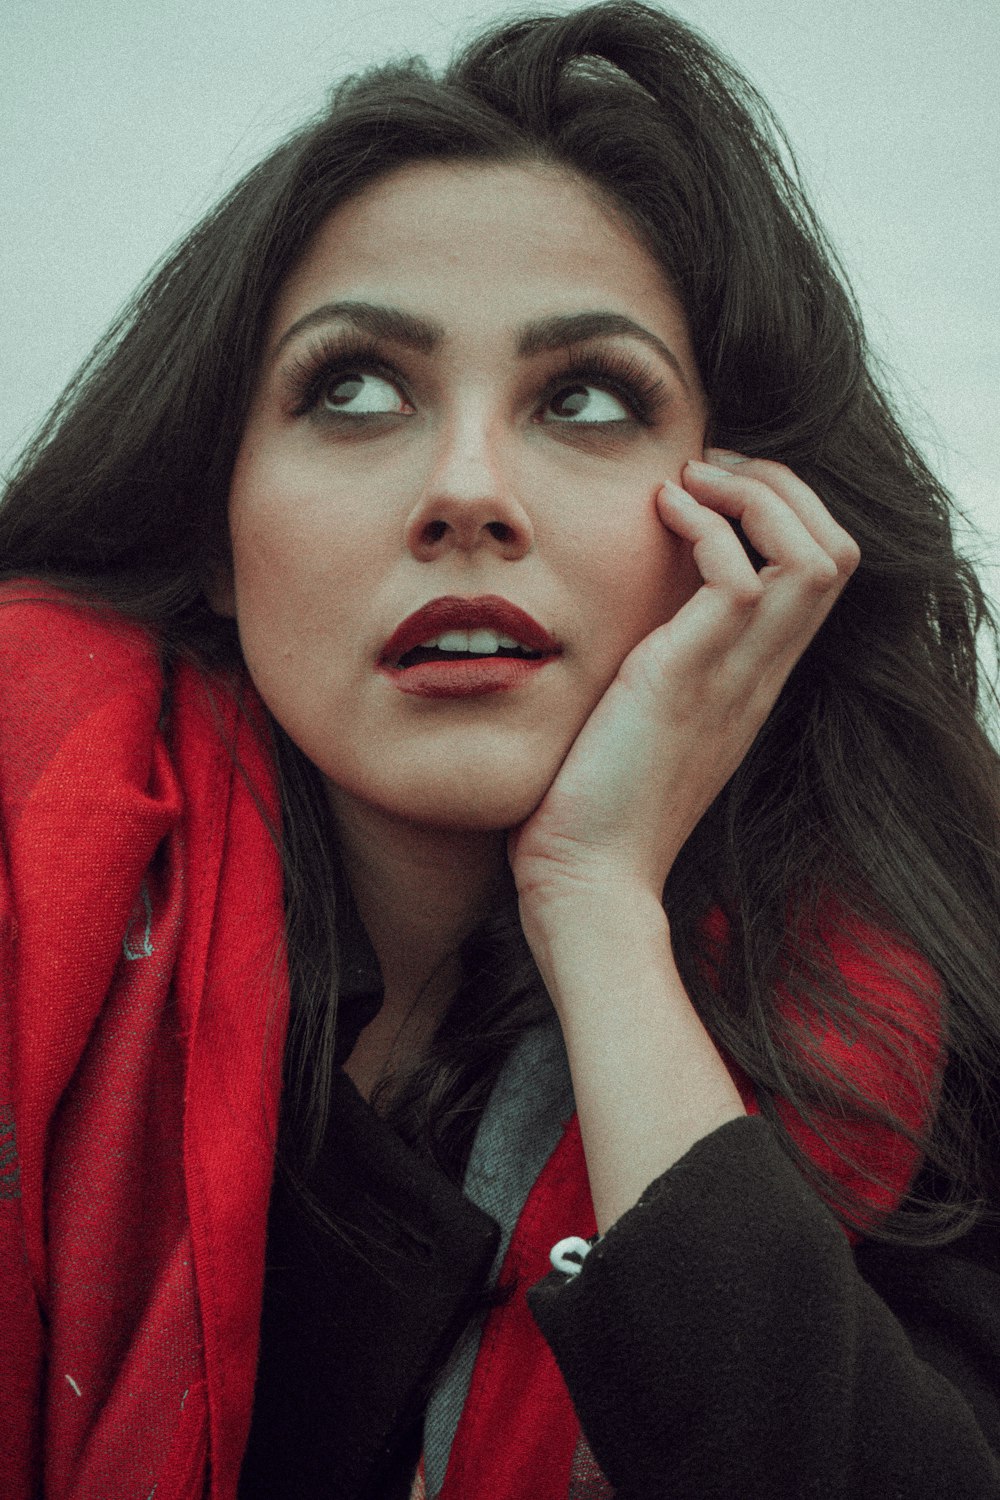 a woman with long dark hair wearing a red jacket